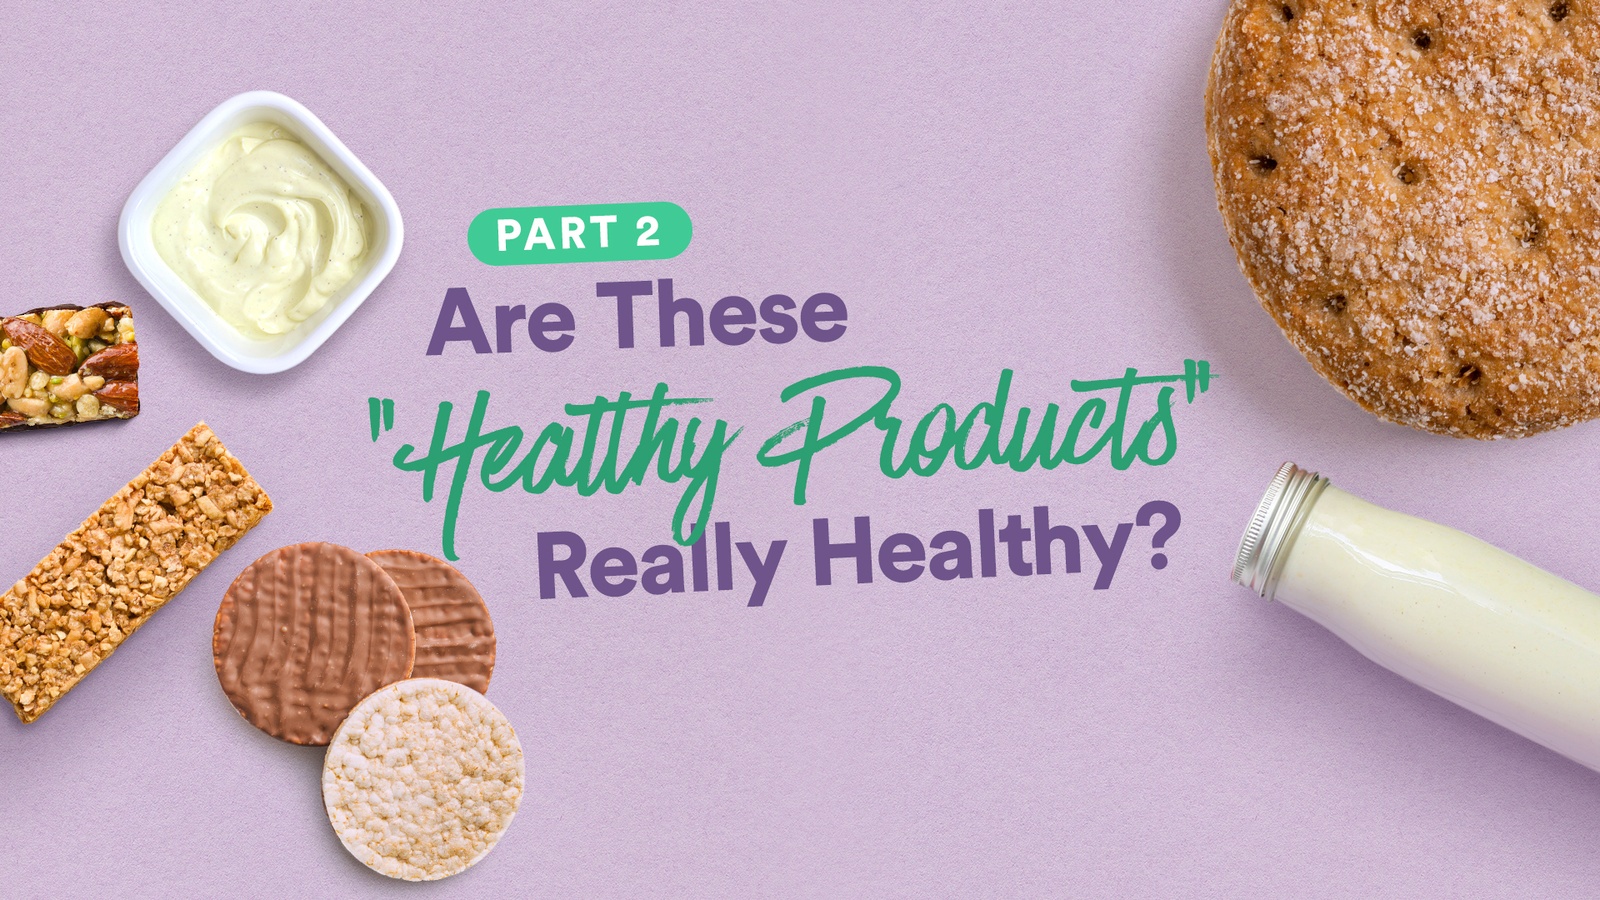 Part 2: Are These "Healthy Products" Really Healthy?